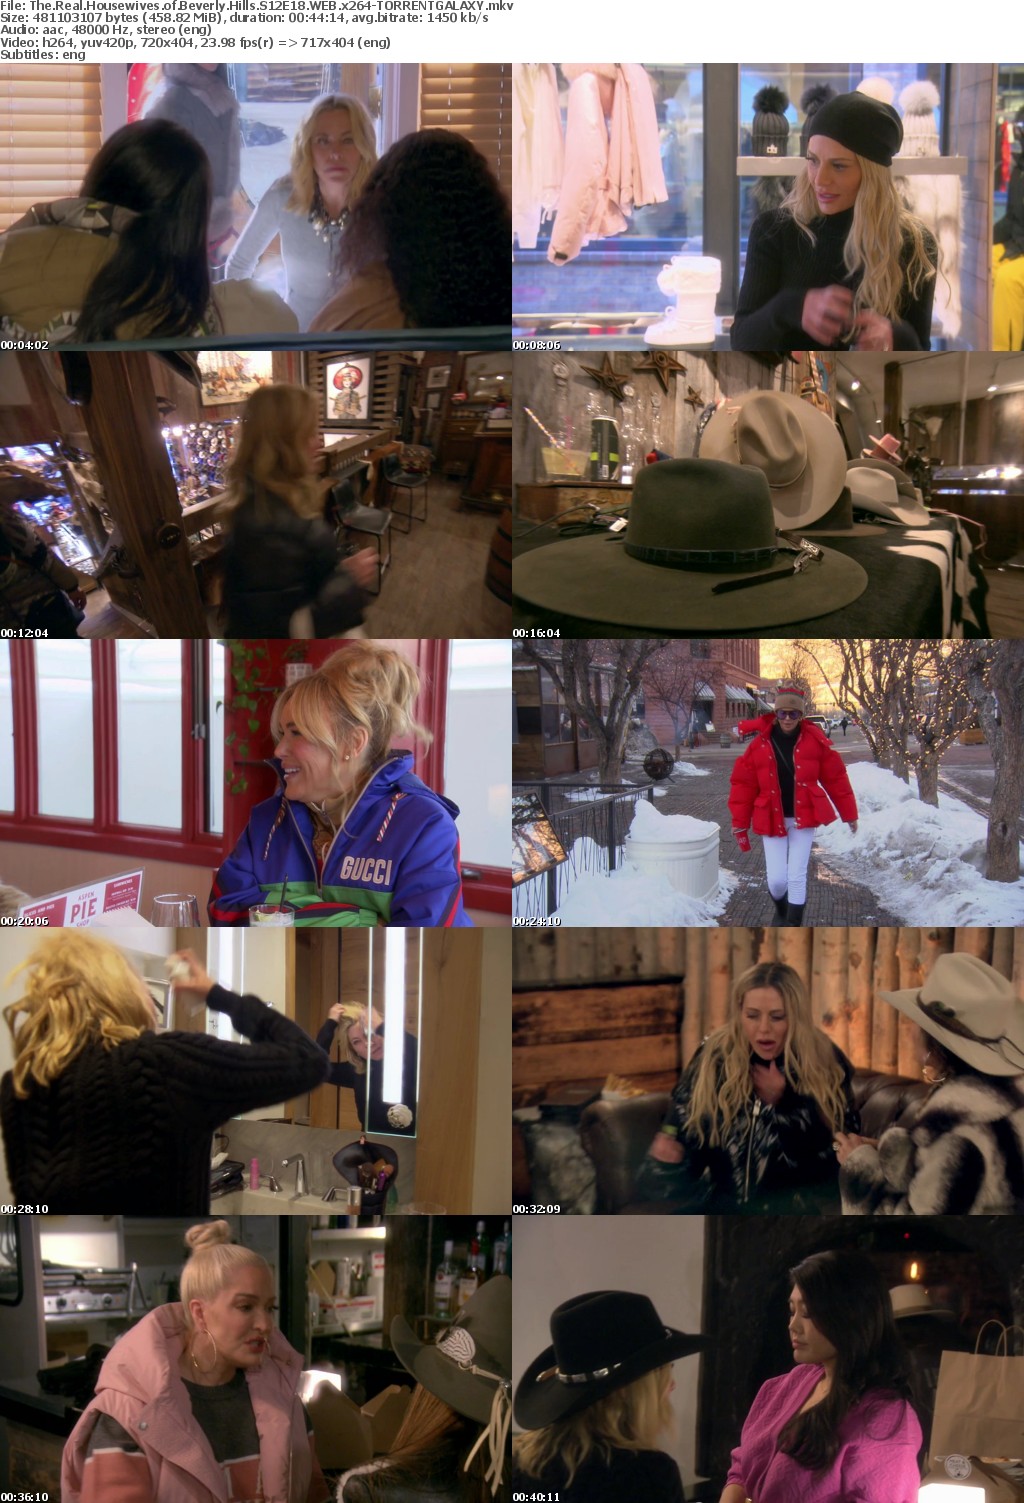 The Real Housewives of Beverly Hills S12E18 WEB x264-GALAXY